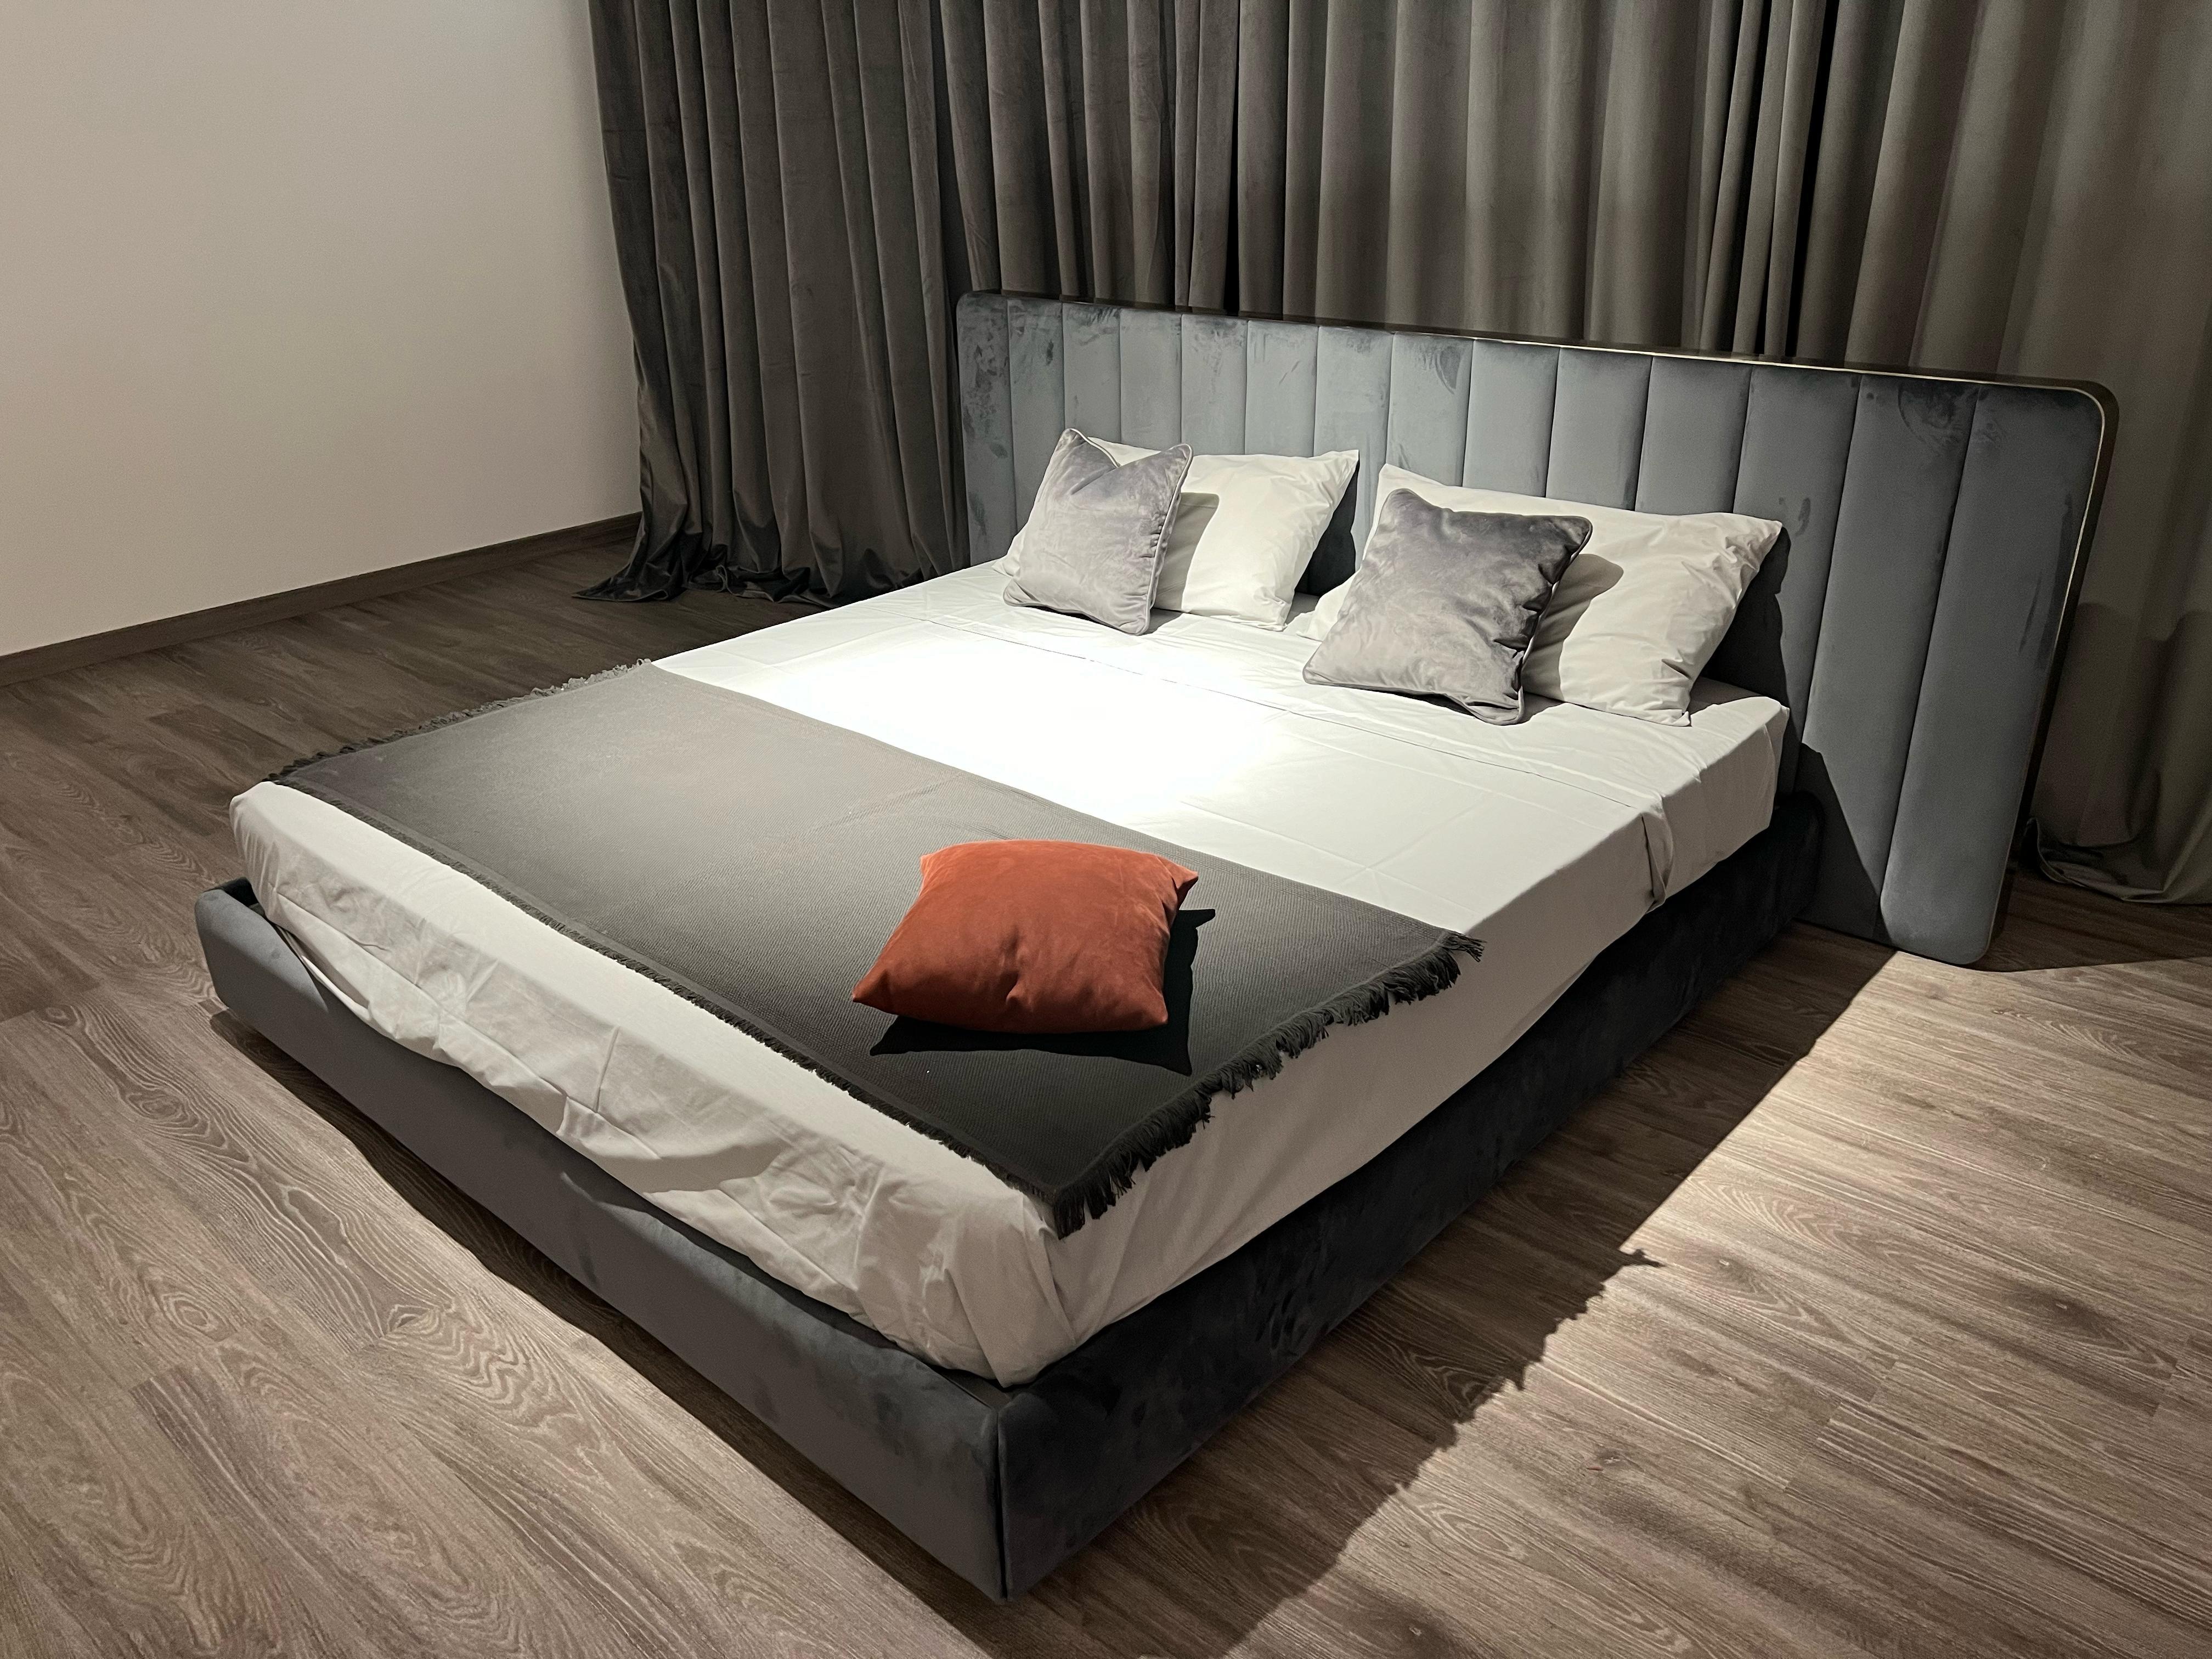 Simple and timeless forms, Douglas, available in this variant for one-movement bed base 180x200 cm.

The mesh size is available in three variations, the product can be customized. The steel frame in a polished black nickel finish to frame the